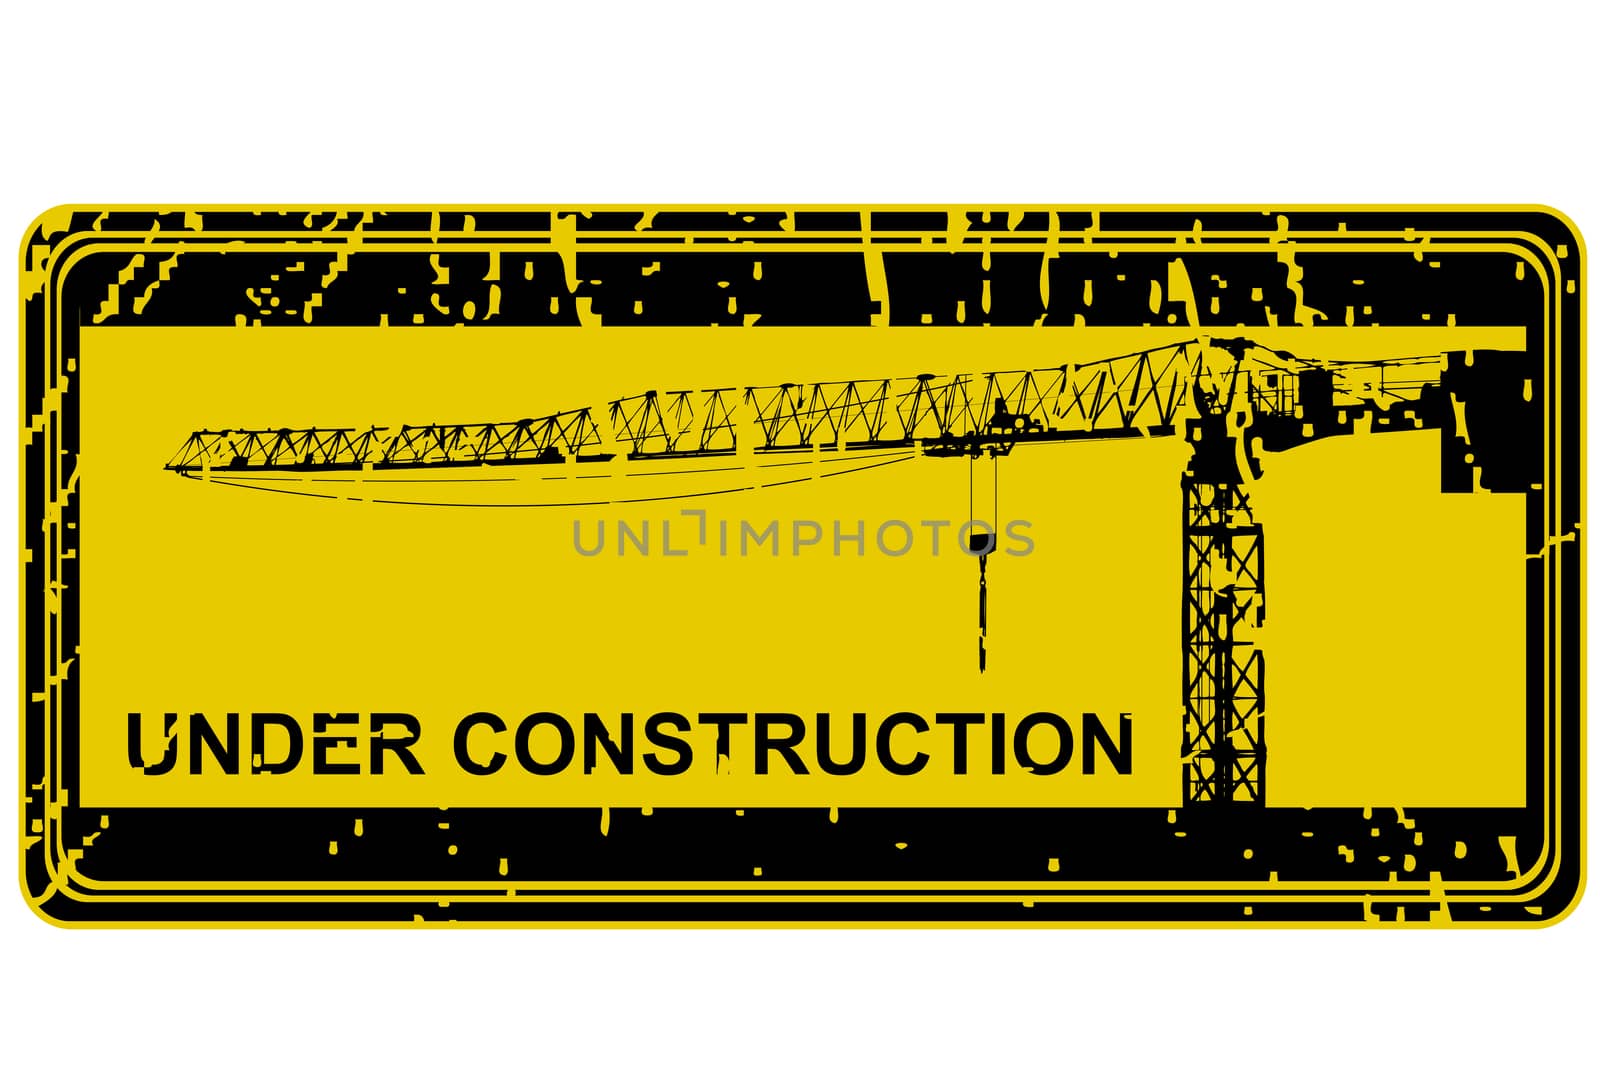 Under construction stamp with crane silhouette by hibrida13